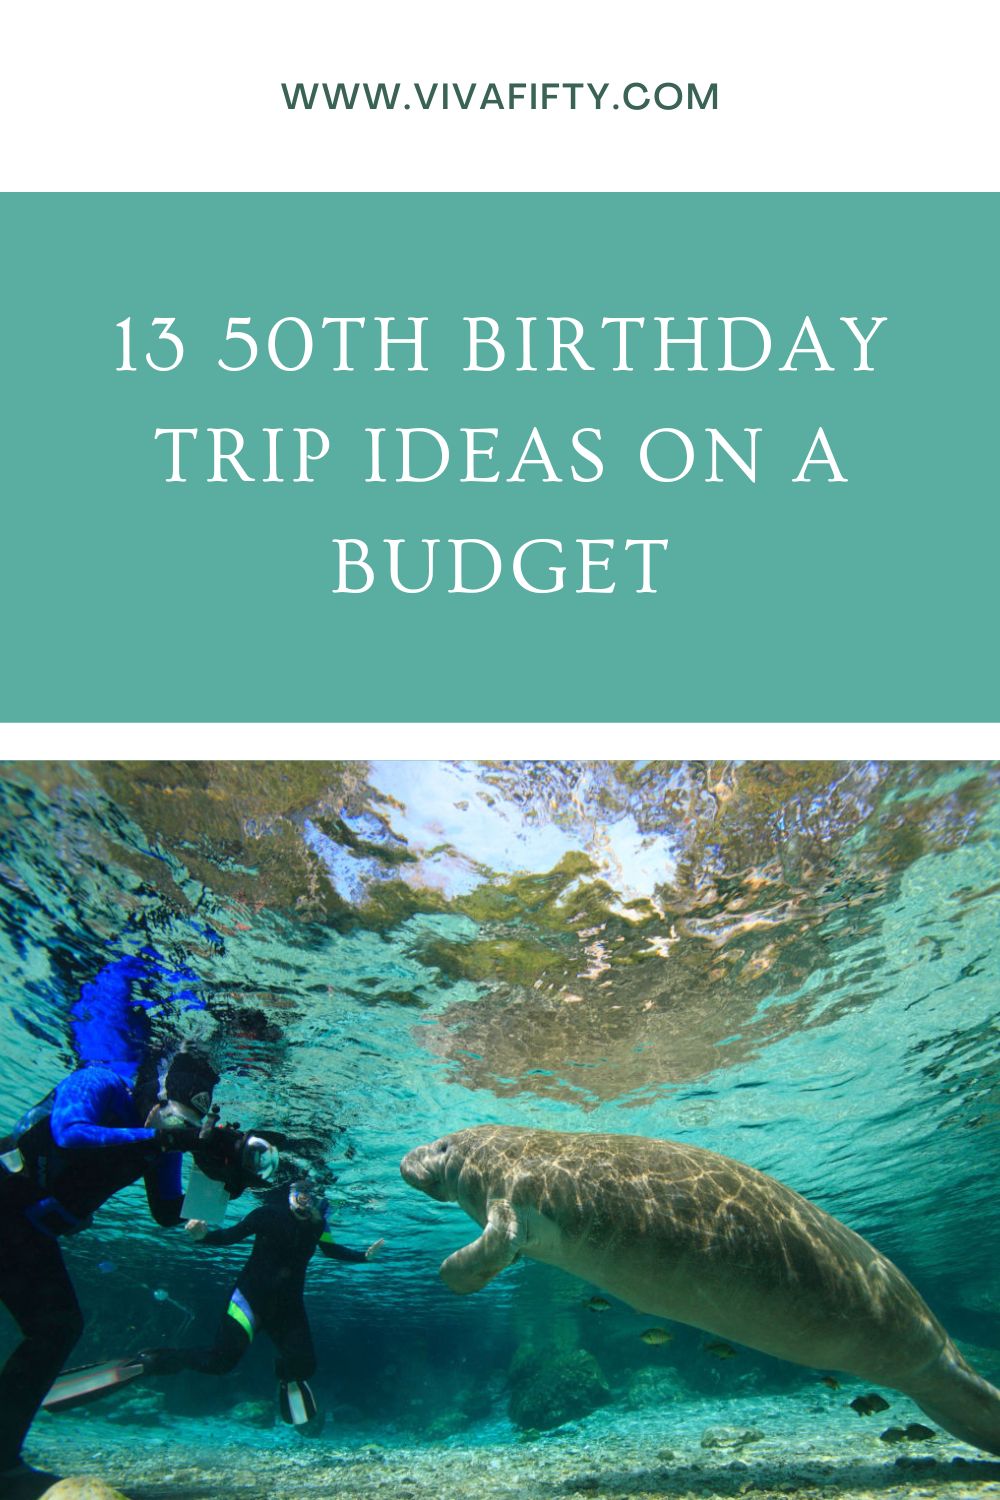 If you’re looking for affordable trips for a 50th birthday celebration, here are a few destinations and activities that are fun and budget-friendly.
